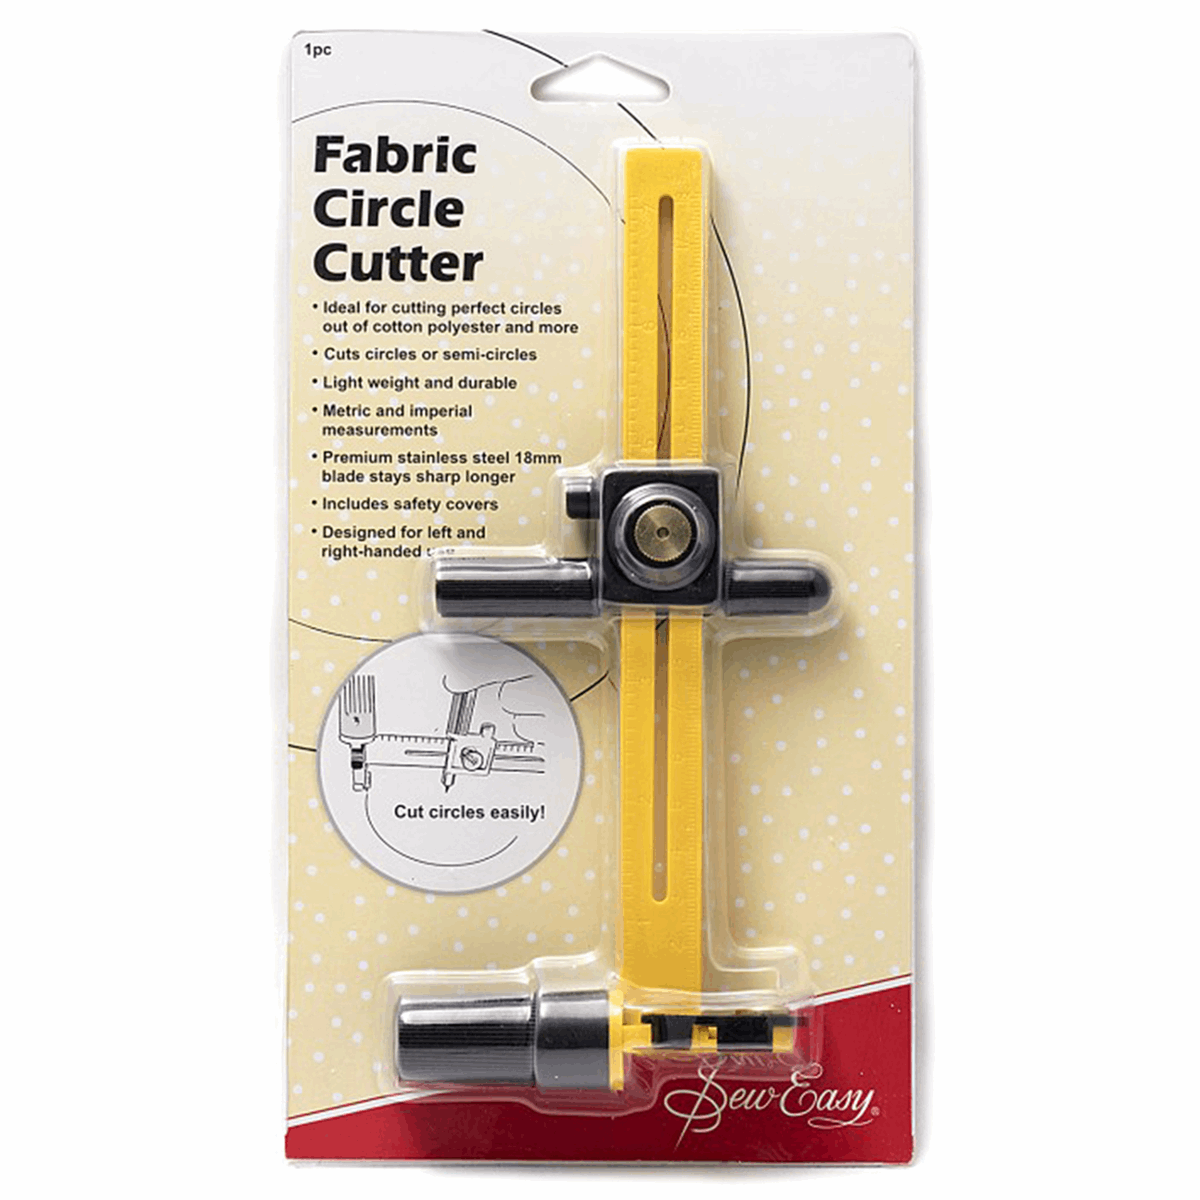 Sew Easy Circle Fabric Cutter